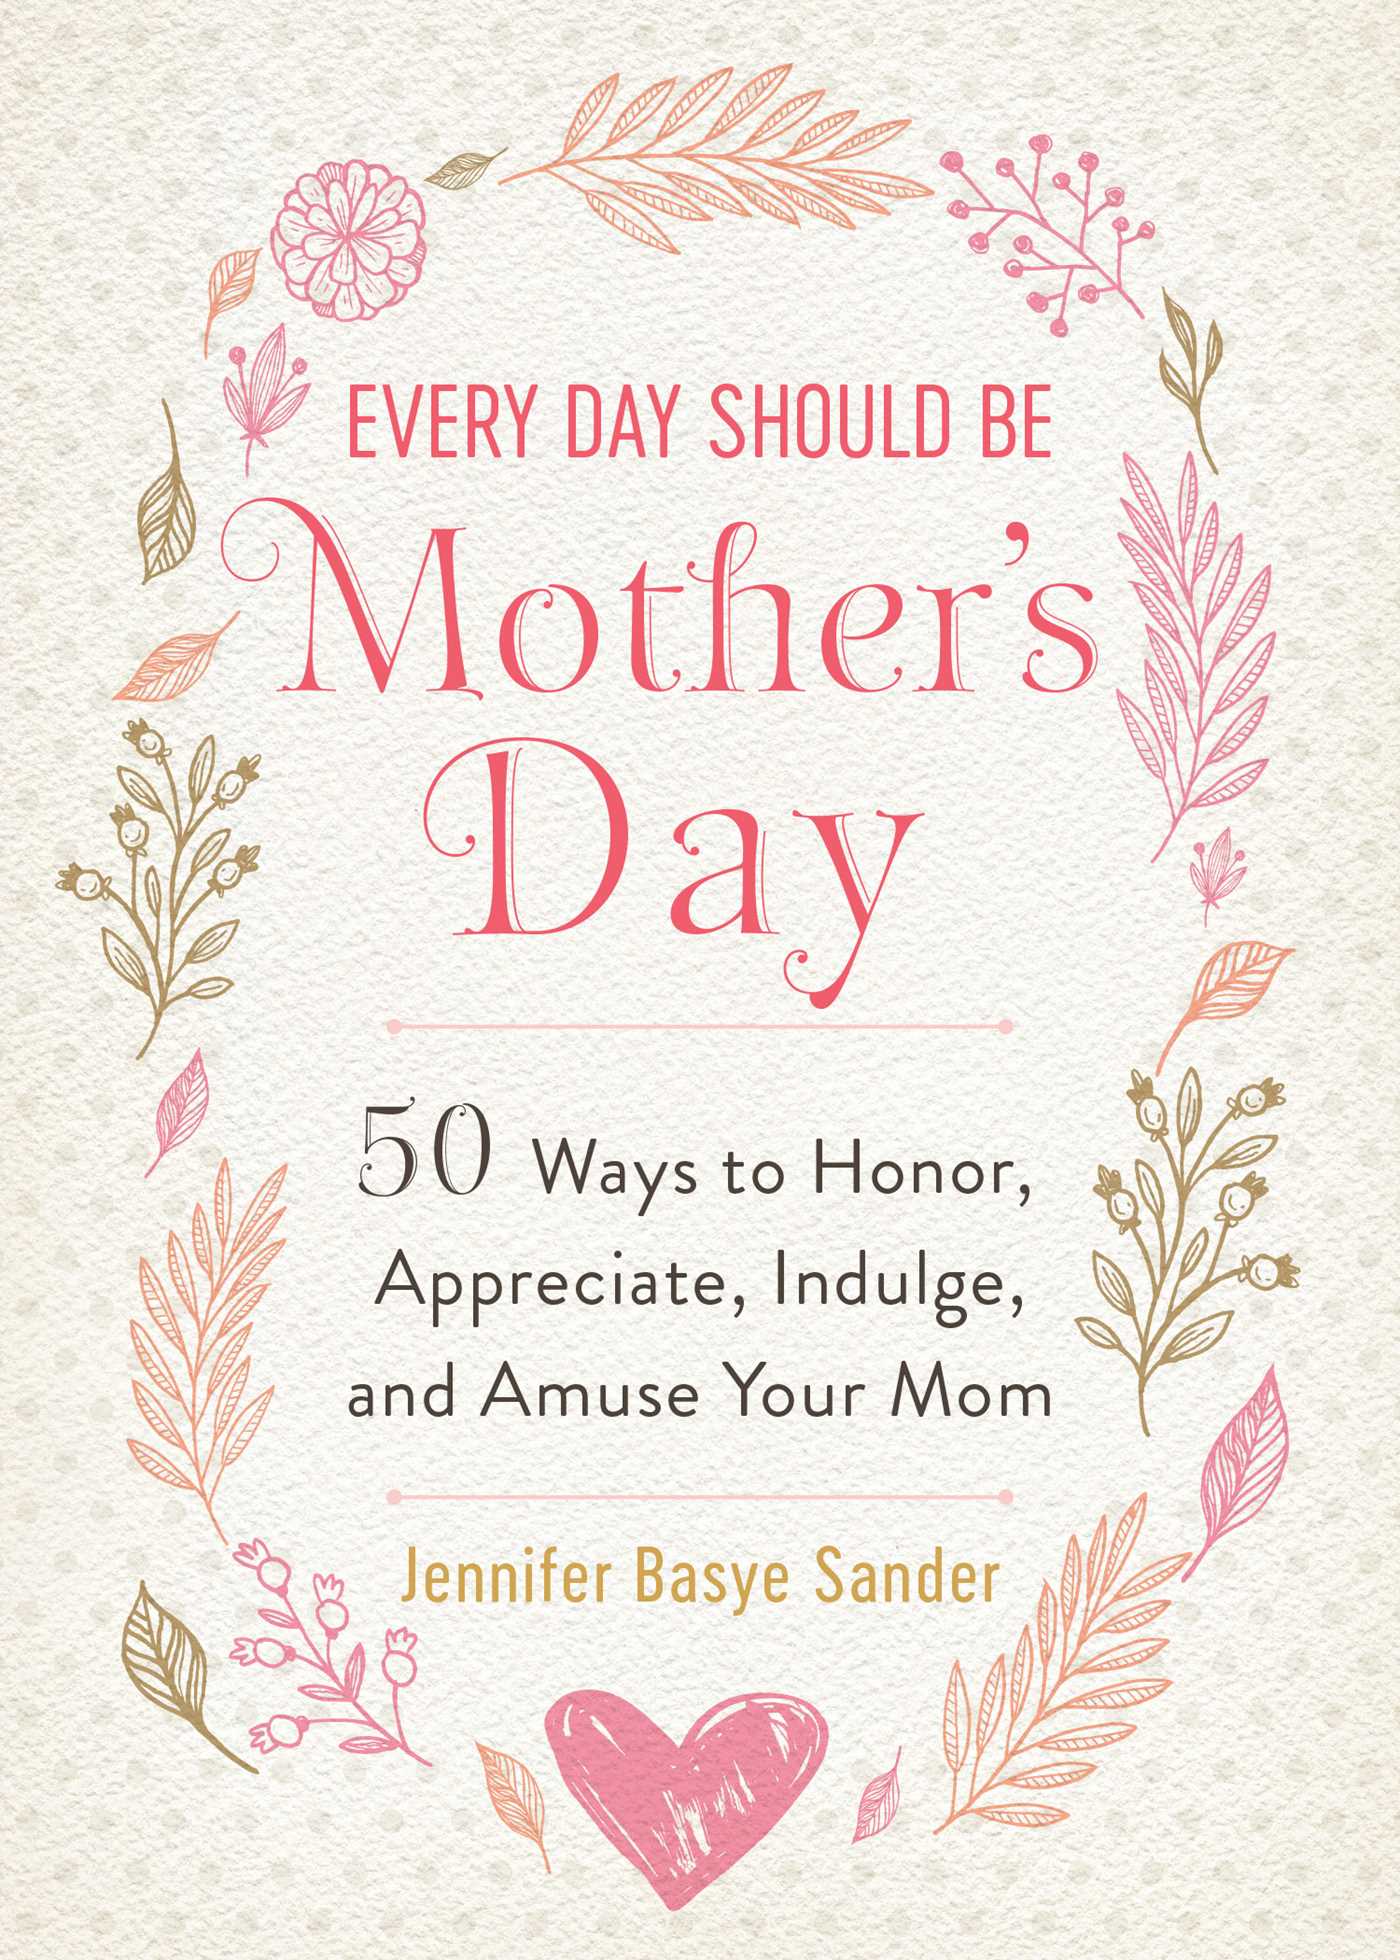 Every Day Should be Mother's Day : 50 Ways to Honor, Appreciate, Indulge, and Amuse Your Mom